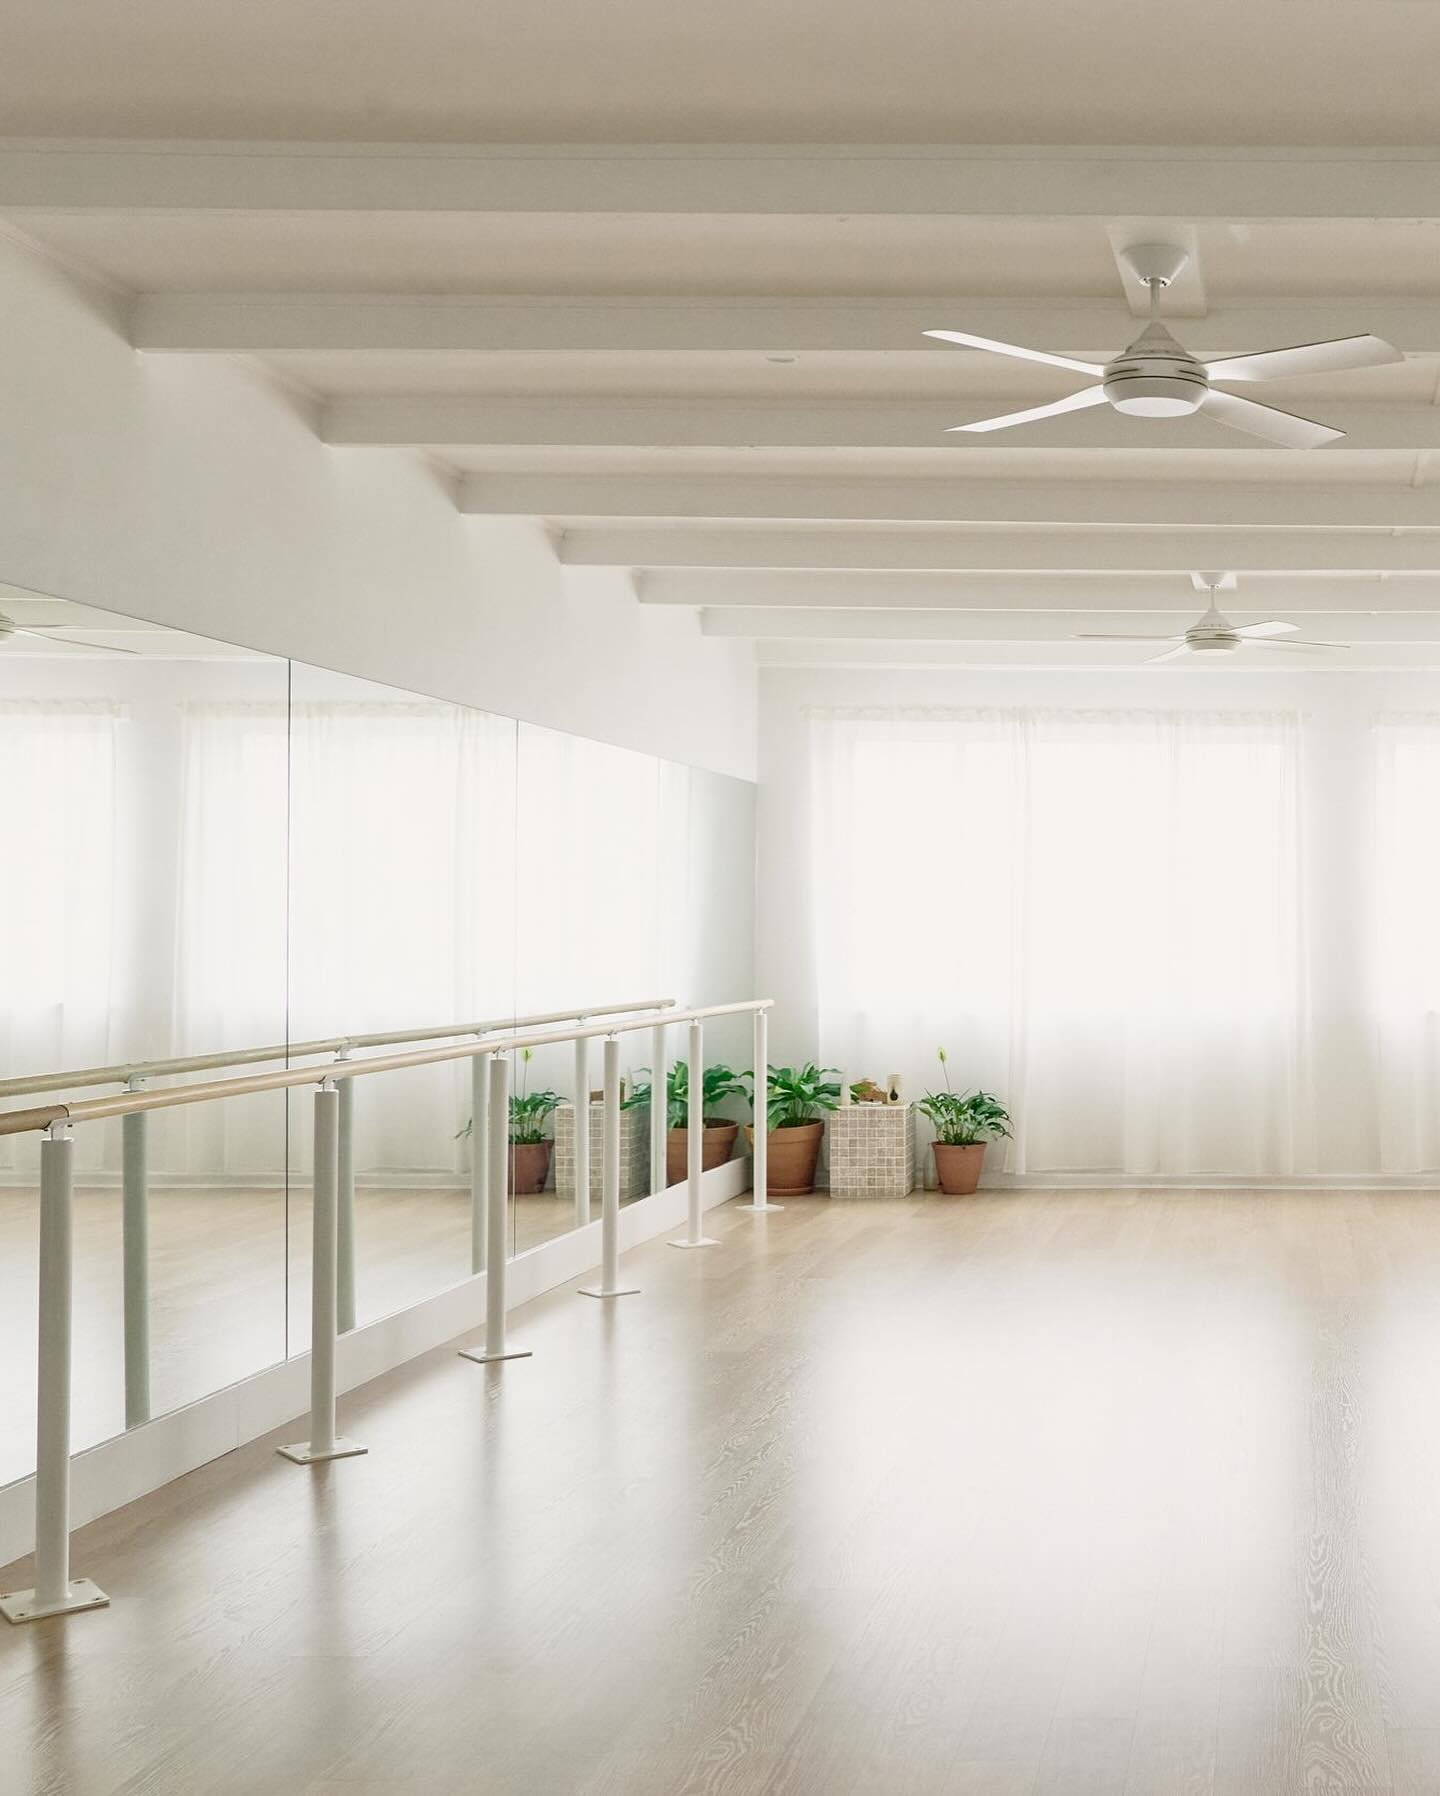 Our beautiful Northcote studio. So light, airy and for many of us- home away from home. See you right here on the mat FG Fam 🫶🏼

Details captured so beautifully as always, by our studio manager @jillhaapaniemi ♡